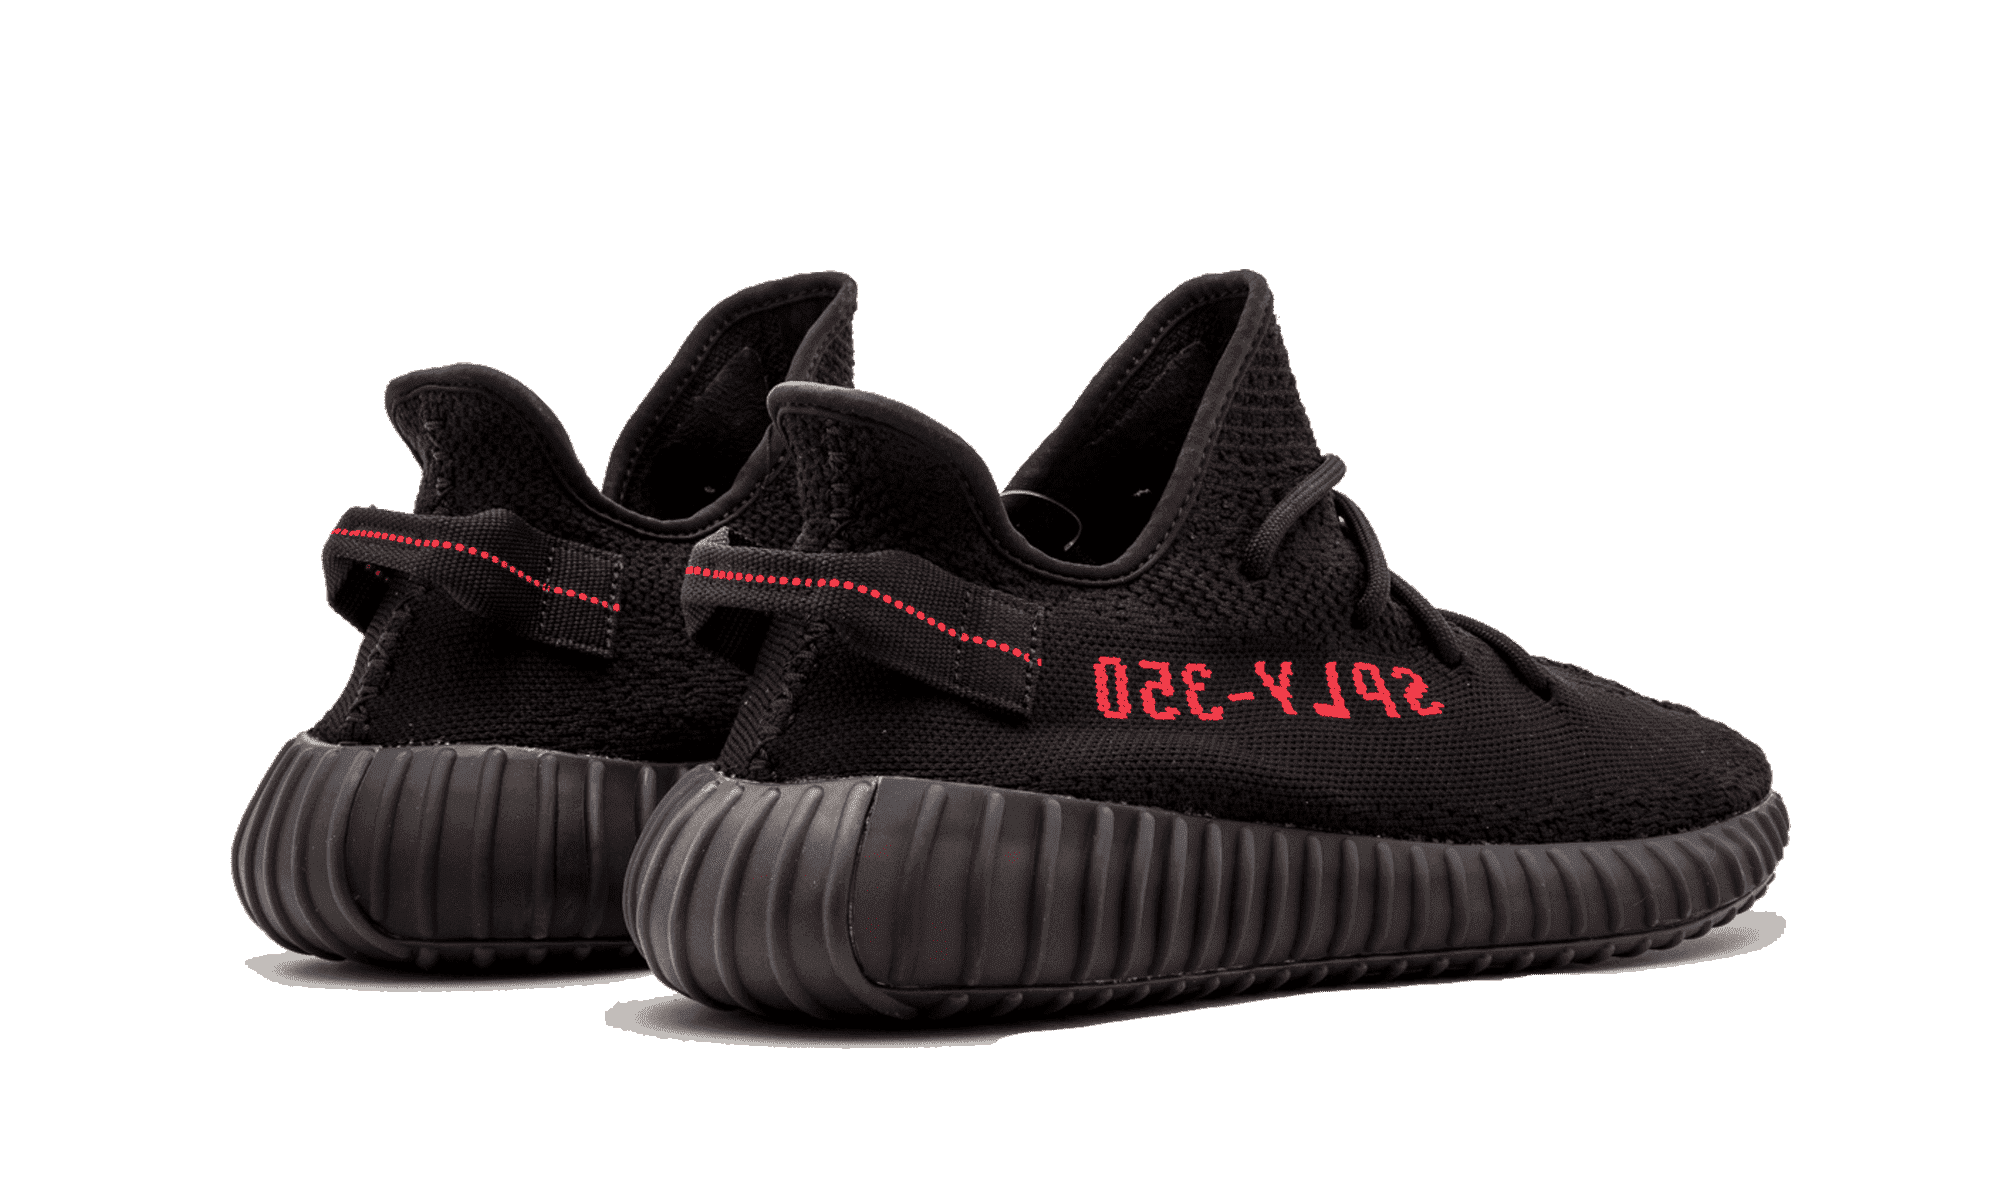 black and red yeezy boost 350 v2